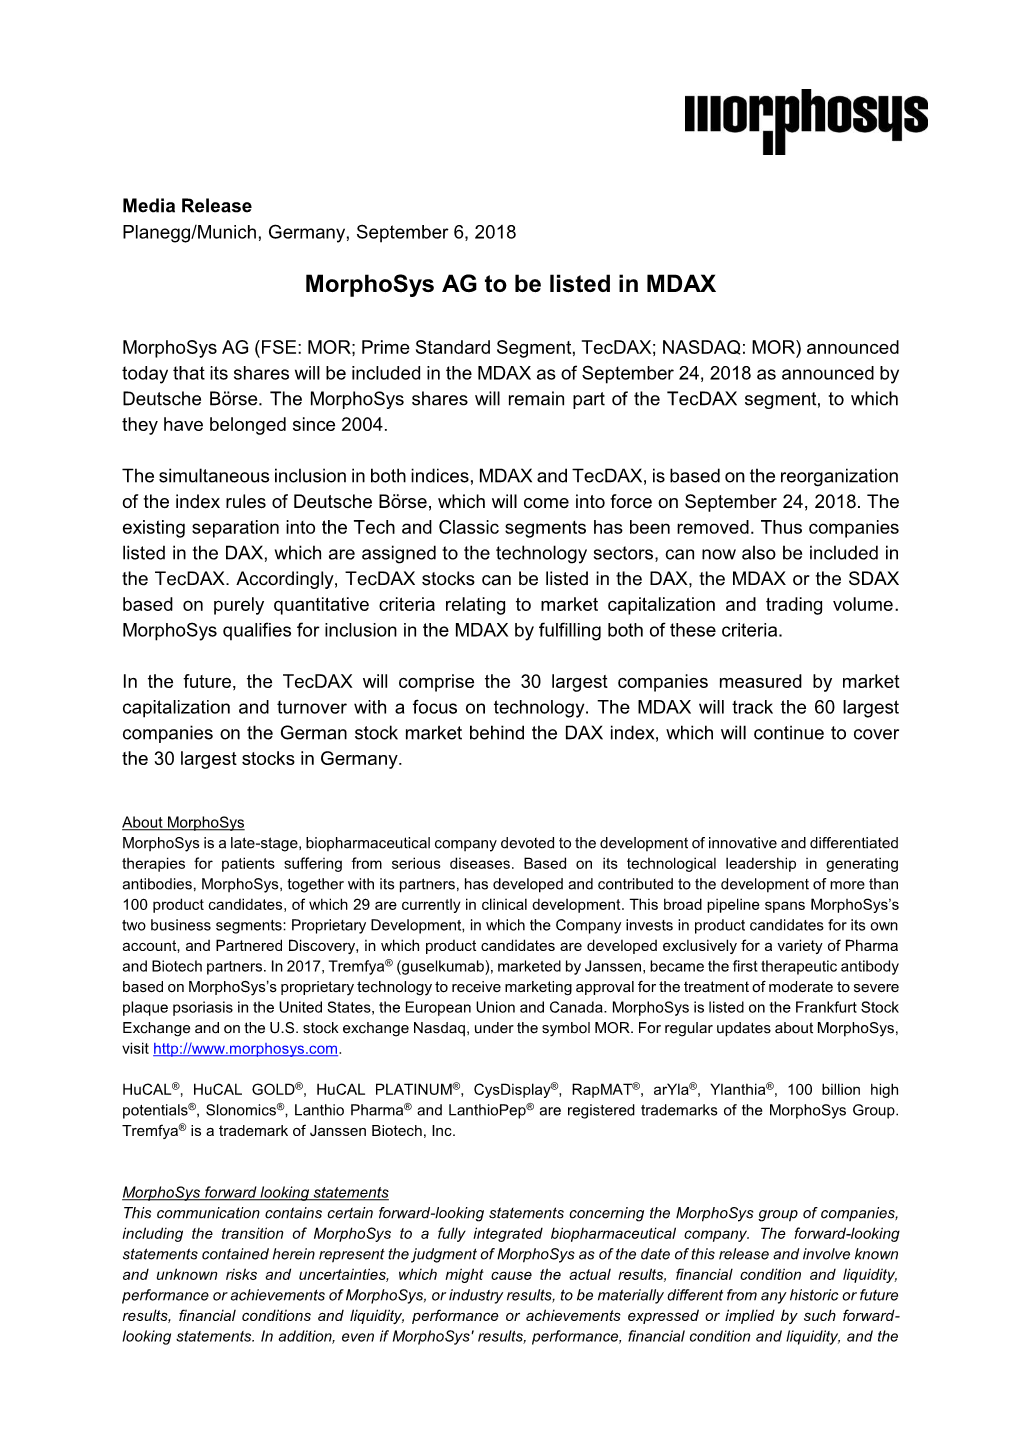 Morphosys AG to Be Listed in MDAX